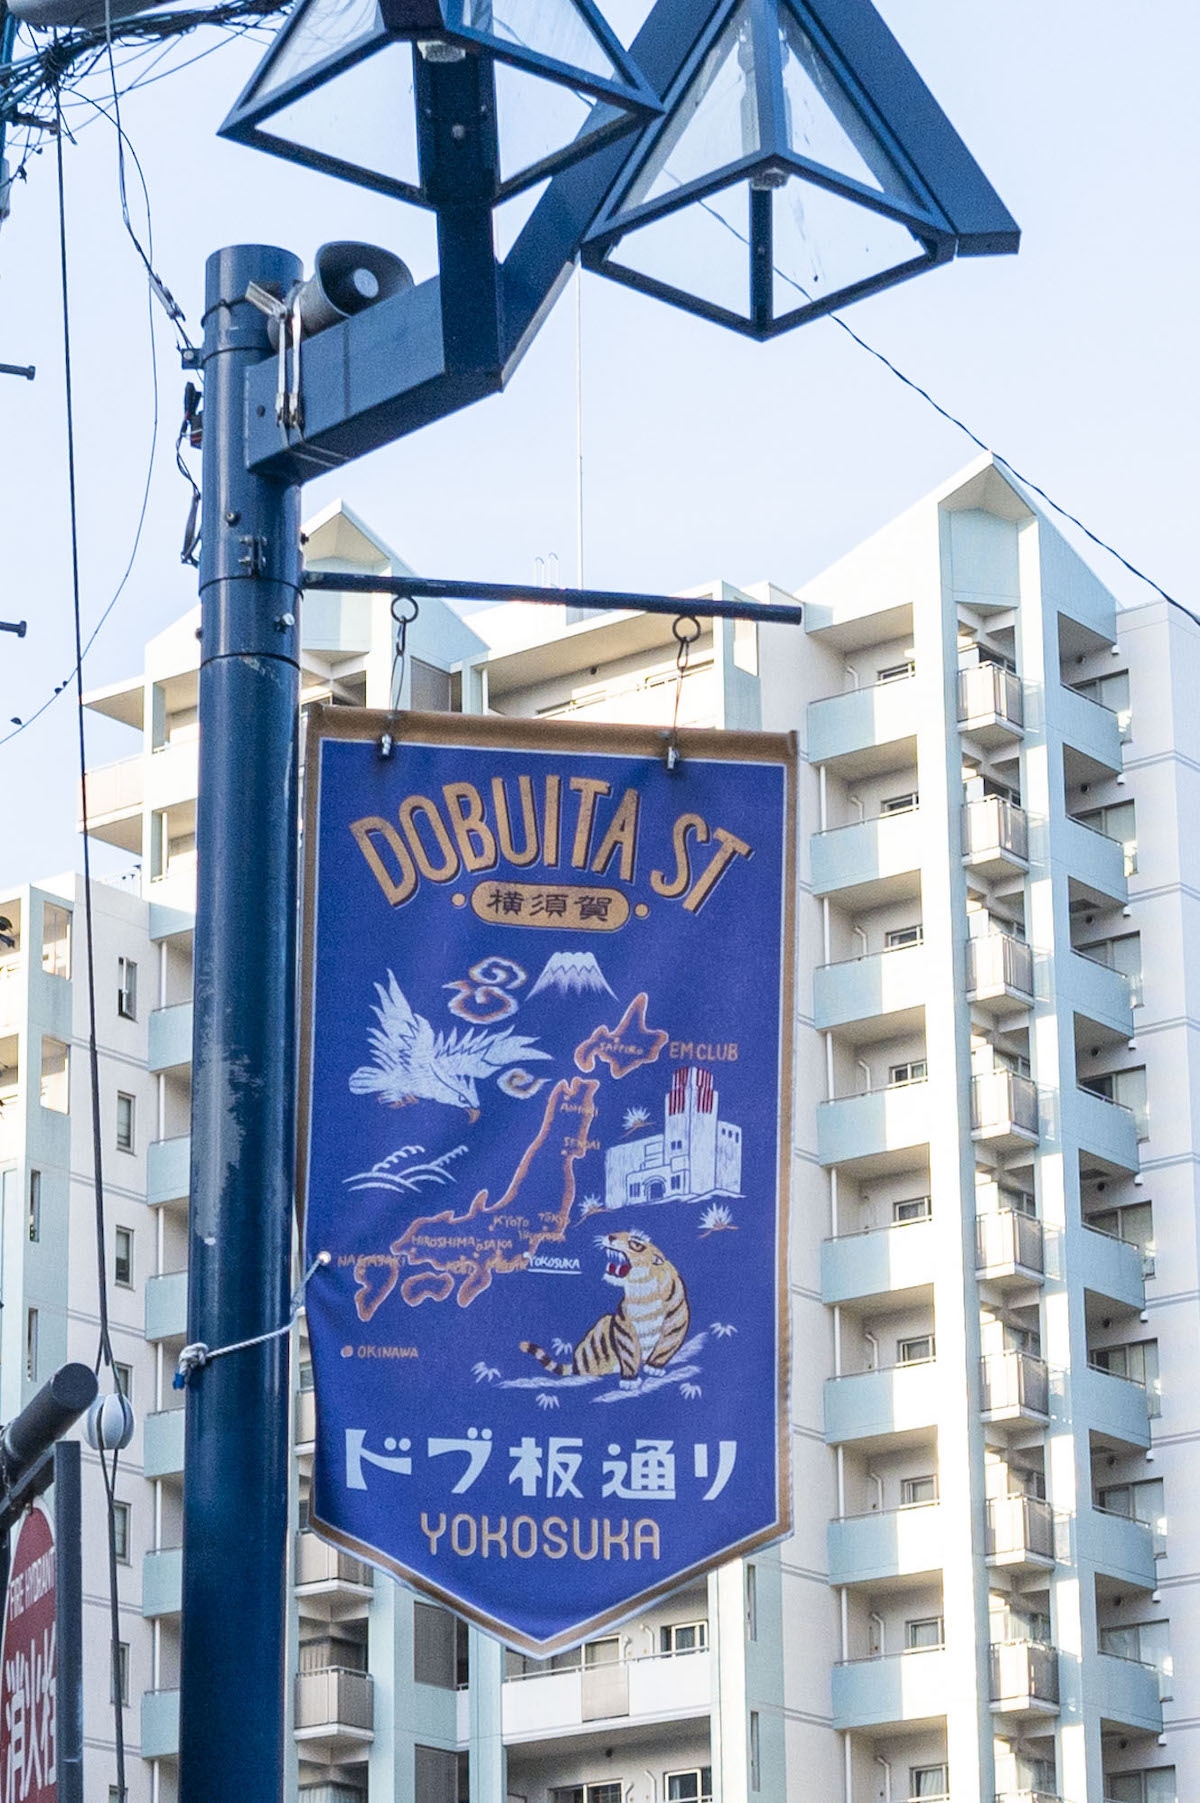 On Dobuita Street, there are also flags with a horizontal embroidery motif.  (Photograph: Praimari)